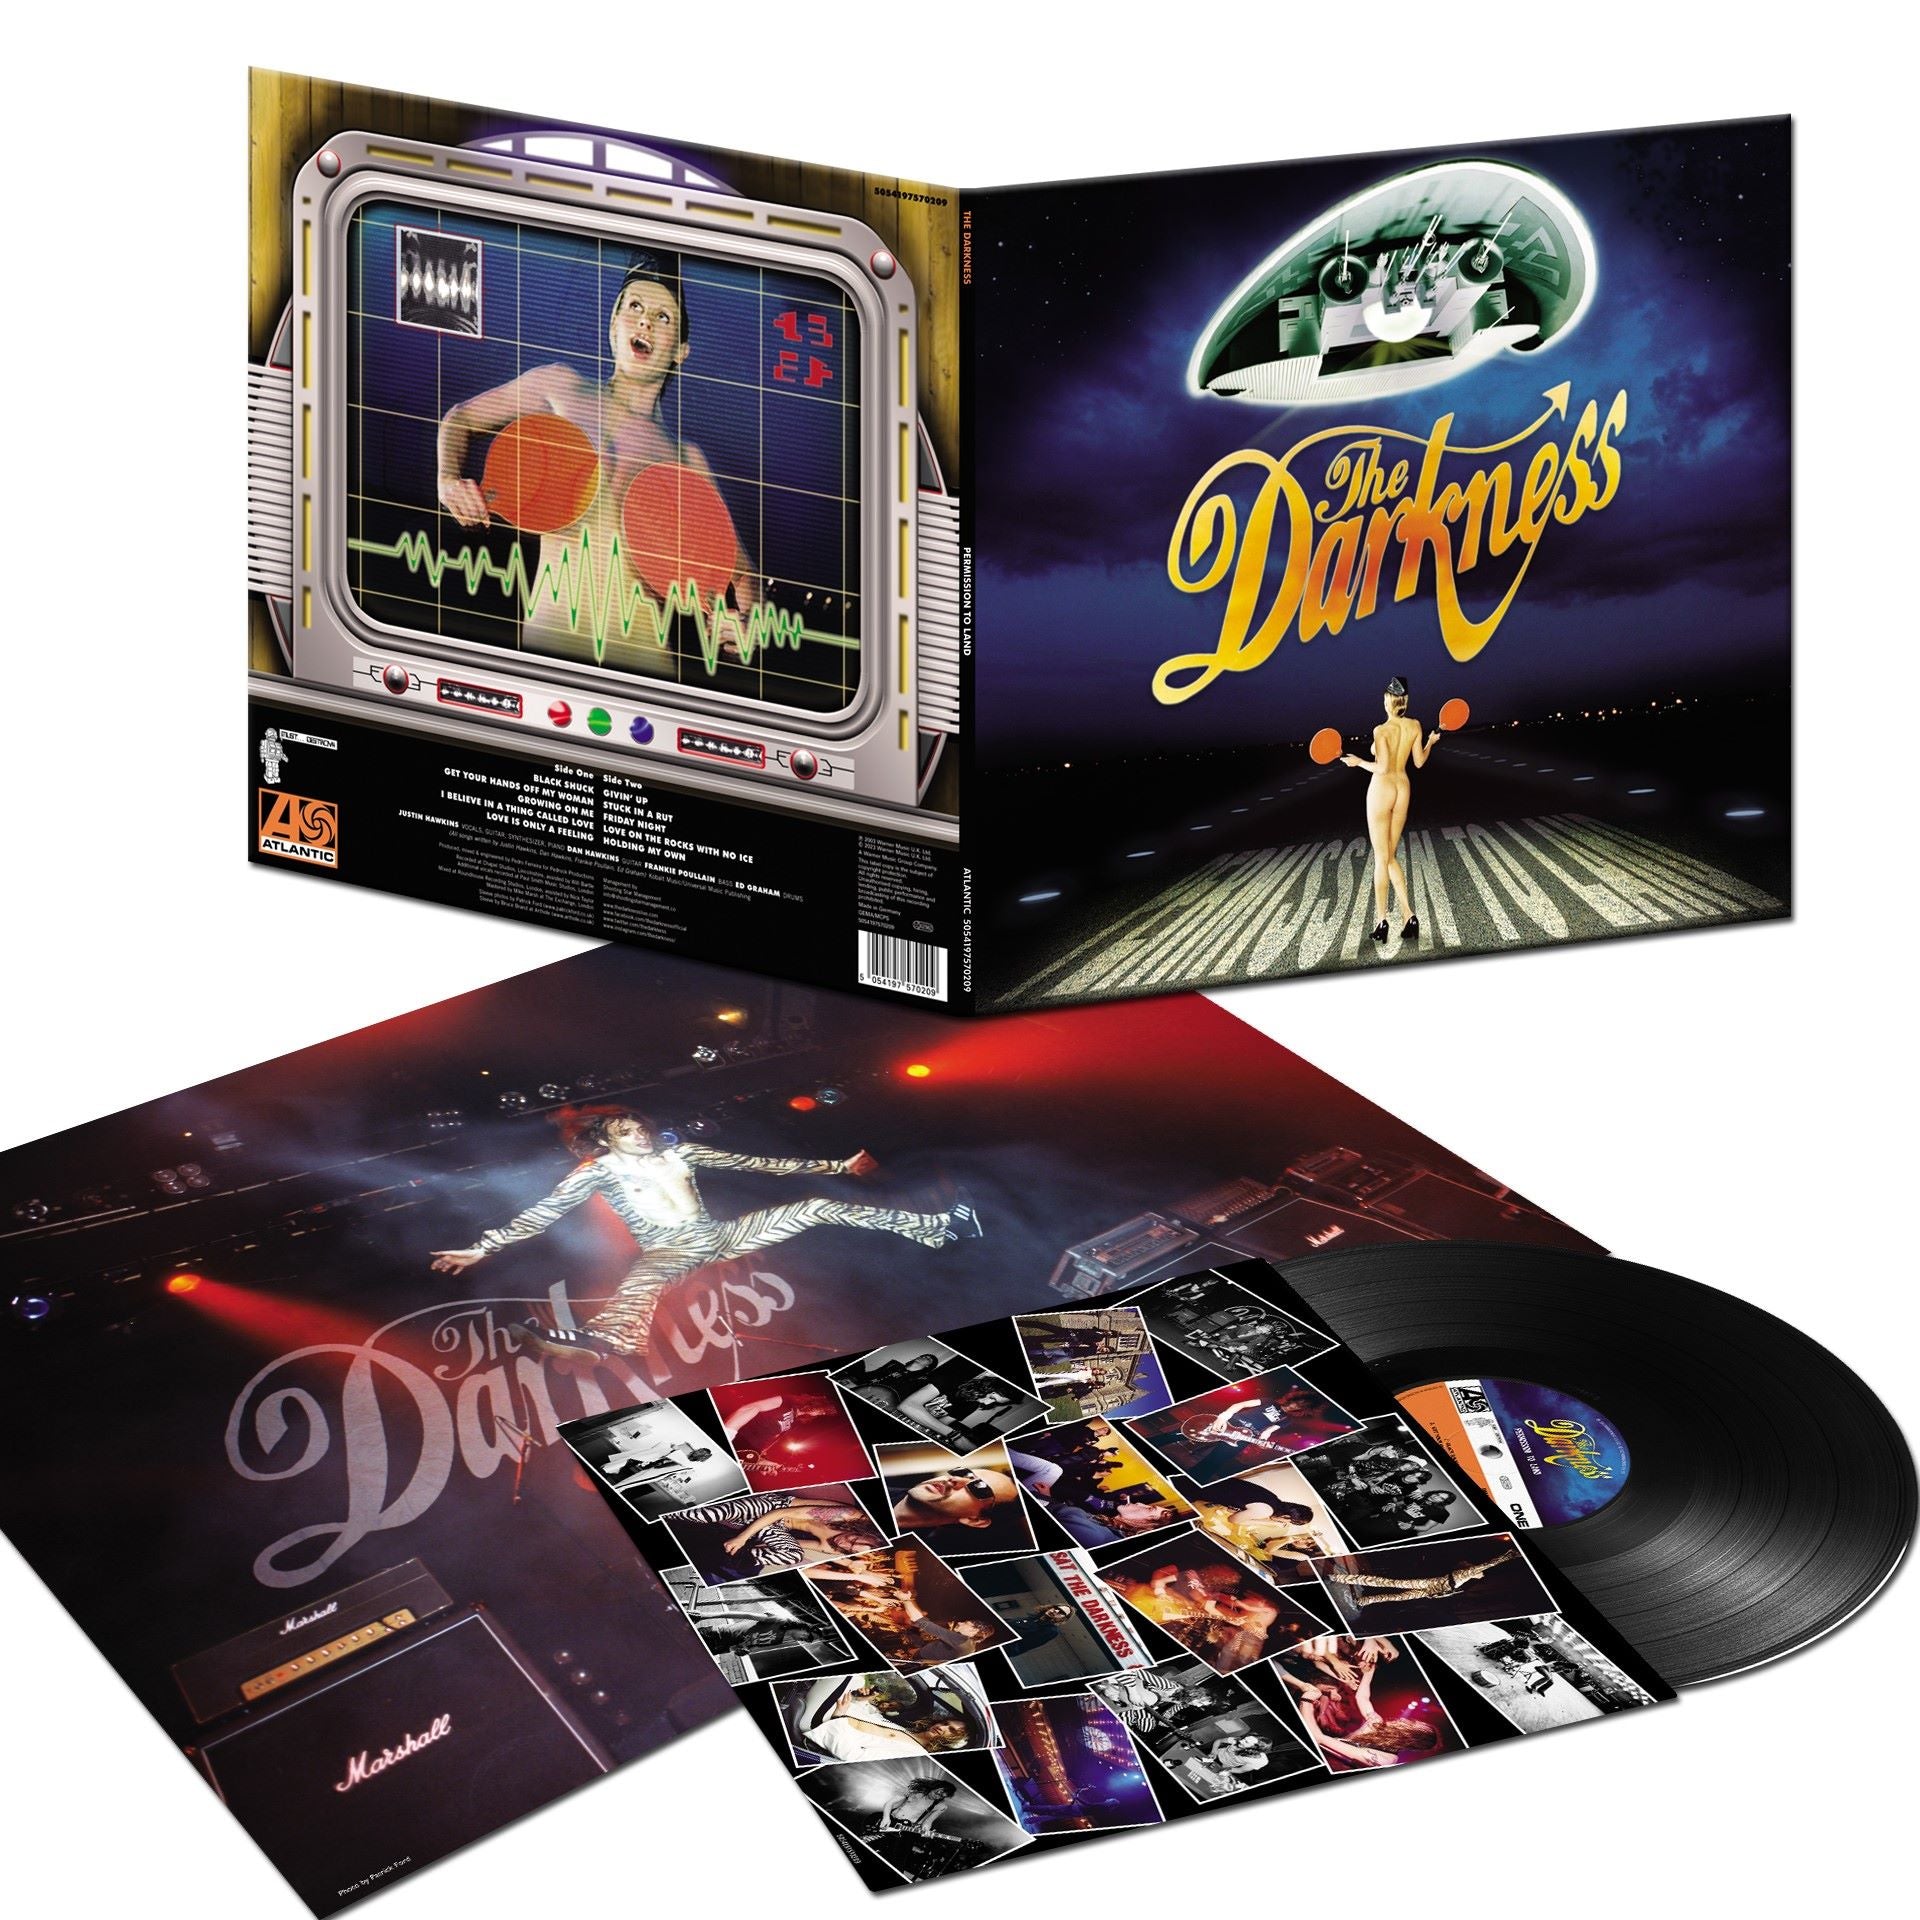 The Darkness - Permission To Land (20th Anniversary Edition): Vinyl LP